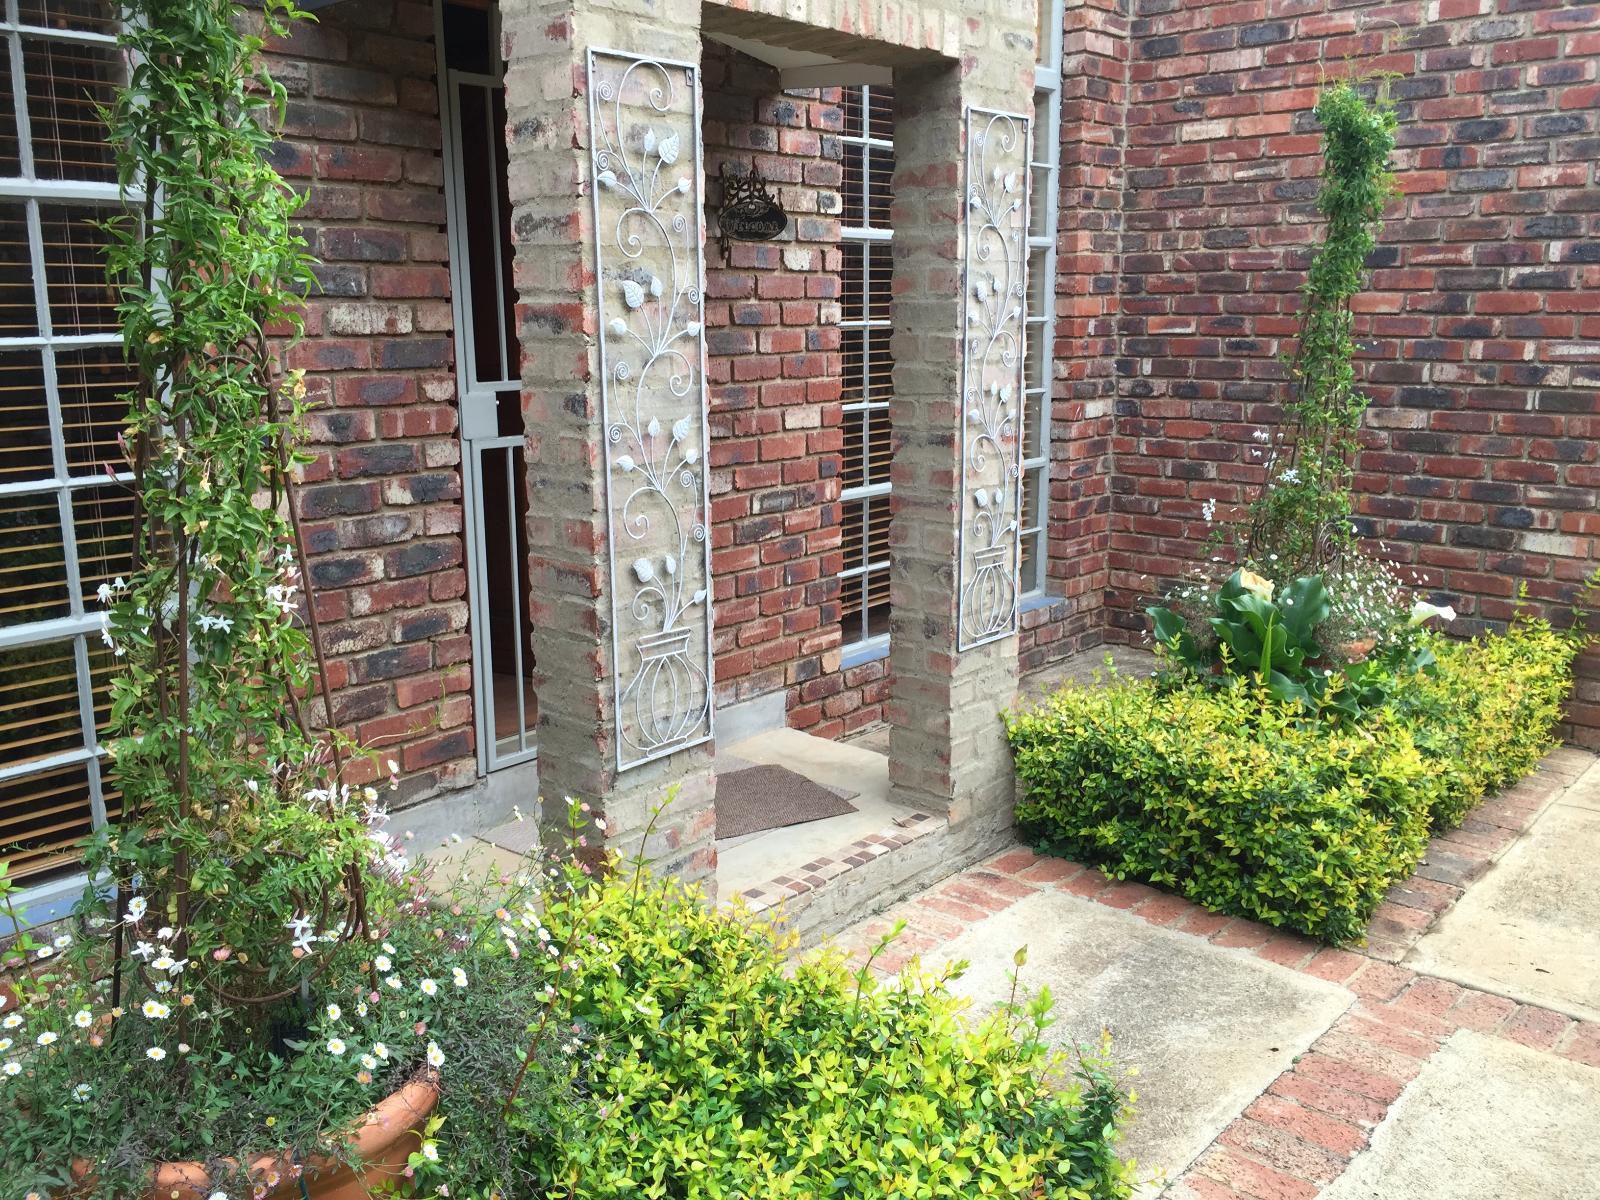 Anne S Place Potchefstroom North West Province South Africa Door, Architecture, House, Building, Wall, Brick Texture, Texture, Garden, Nature, Plant